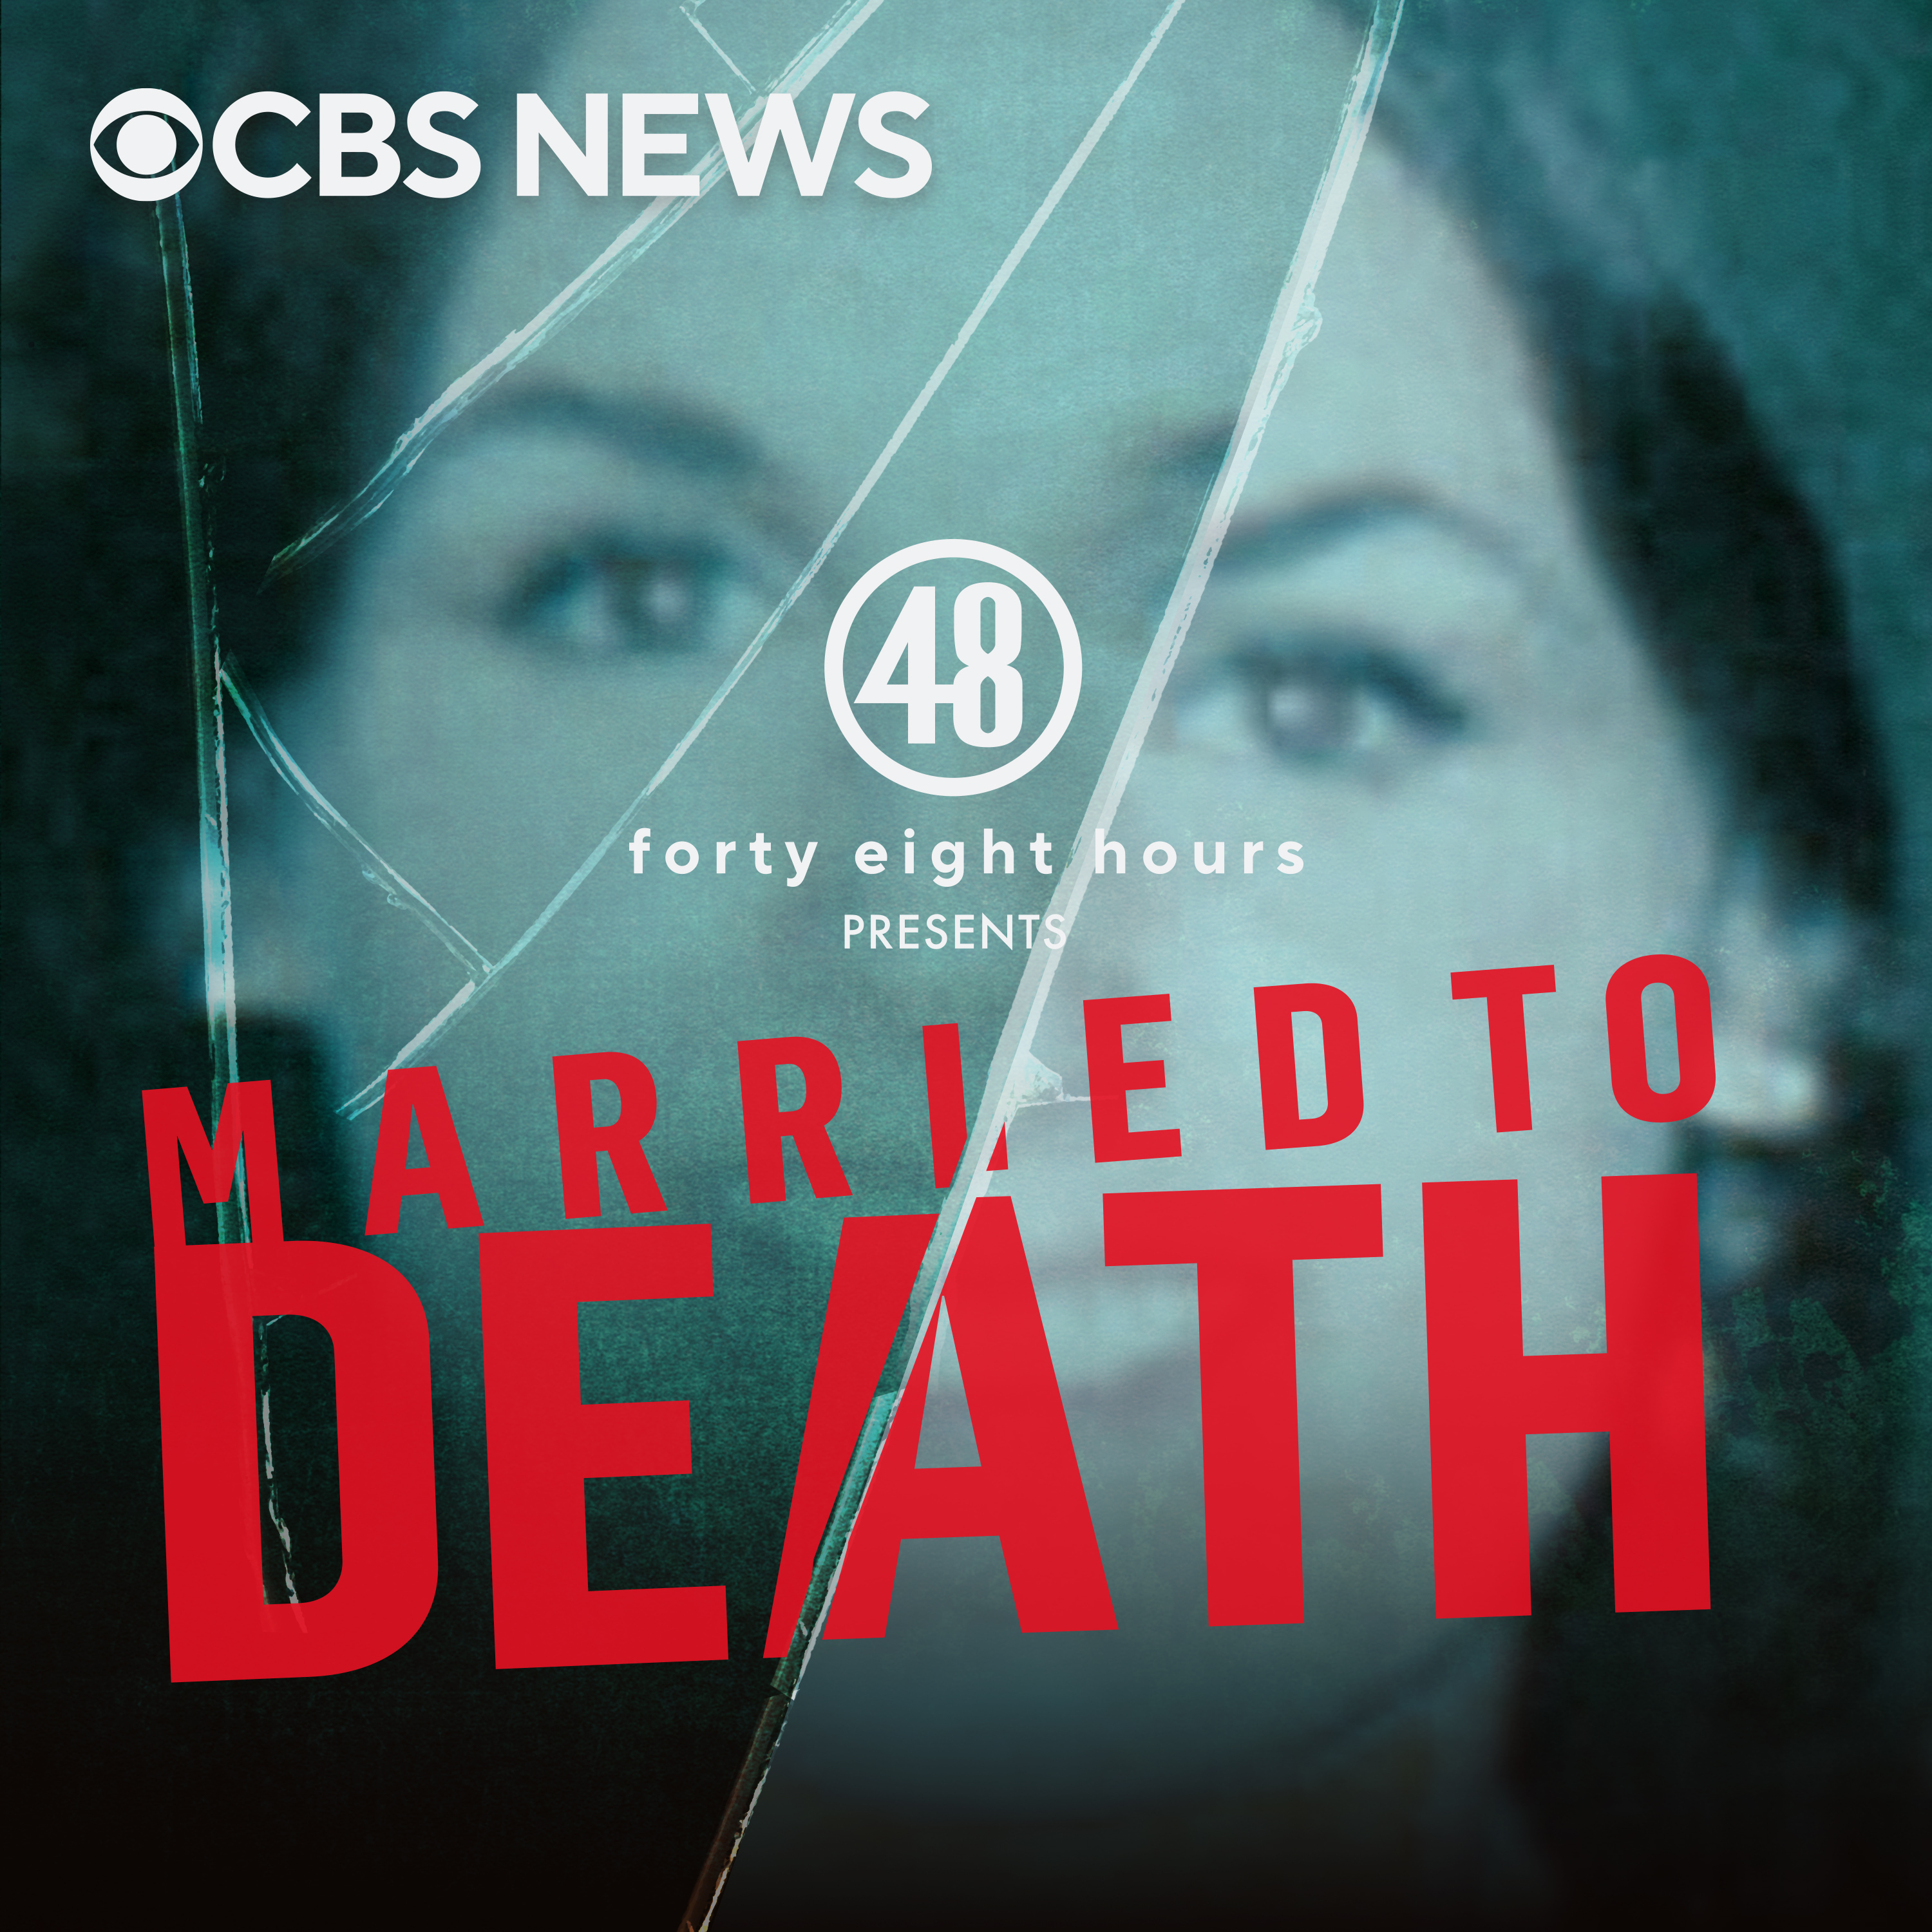 Introducing Raynella Leath | Married to Death from My Life of Crime with Erin Moriarty by CBS News